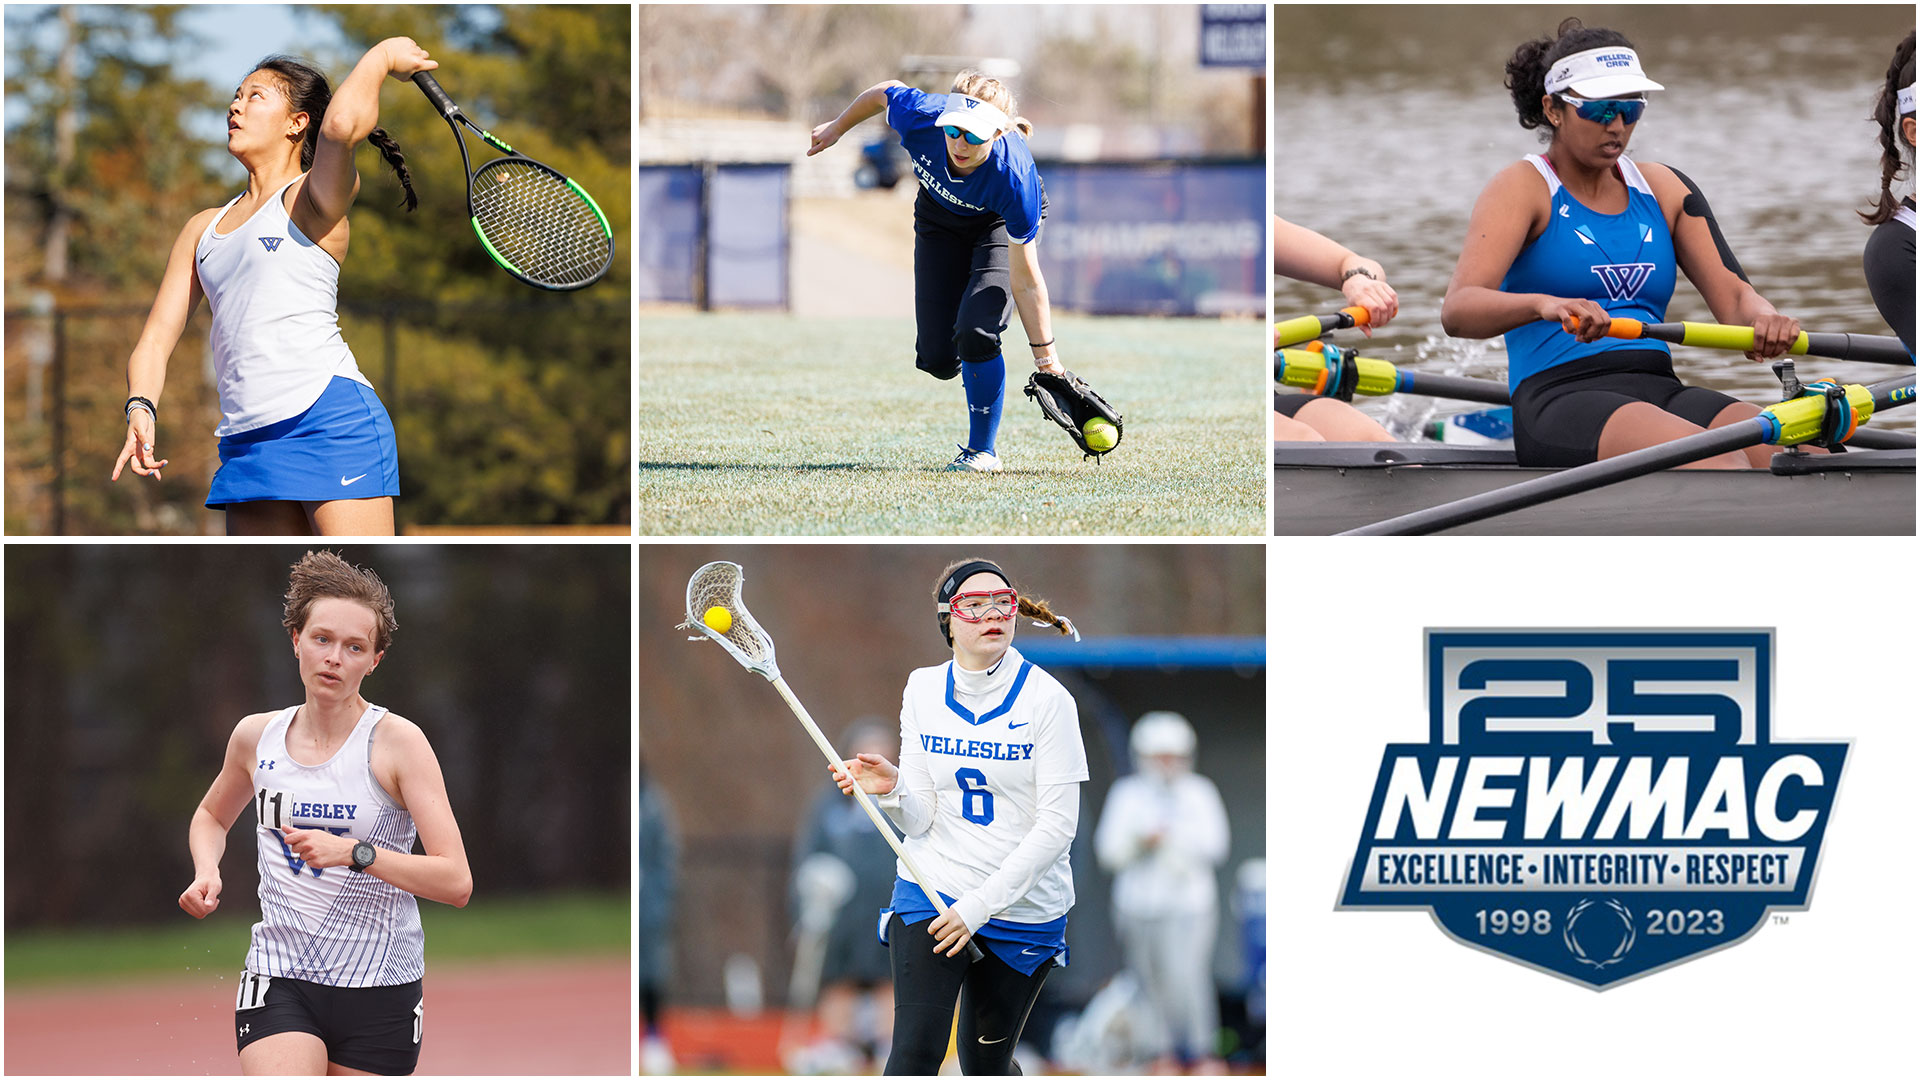 Five Wellesley Athletes were named to the spring NEWMAC All-Sportsmanship team.